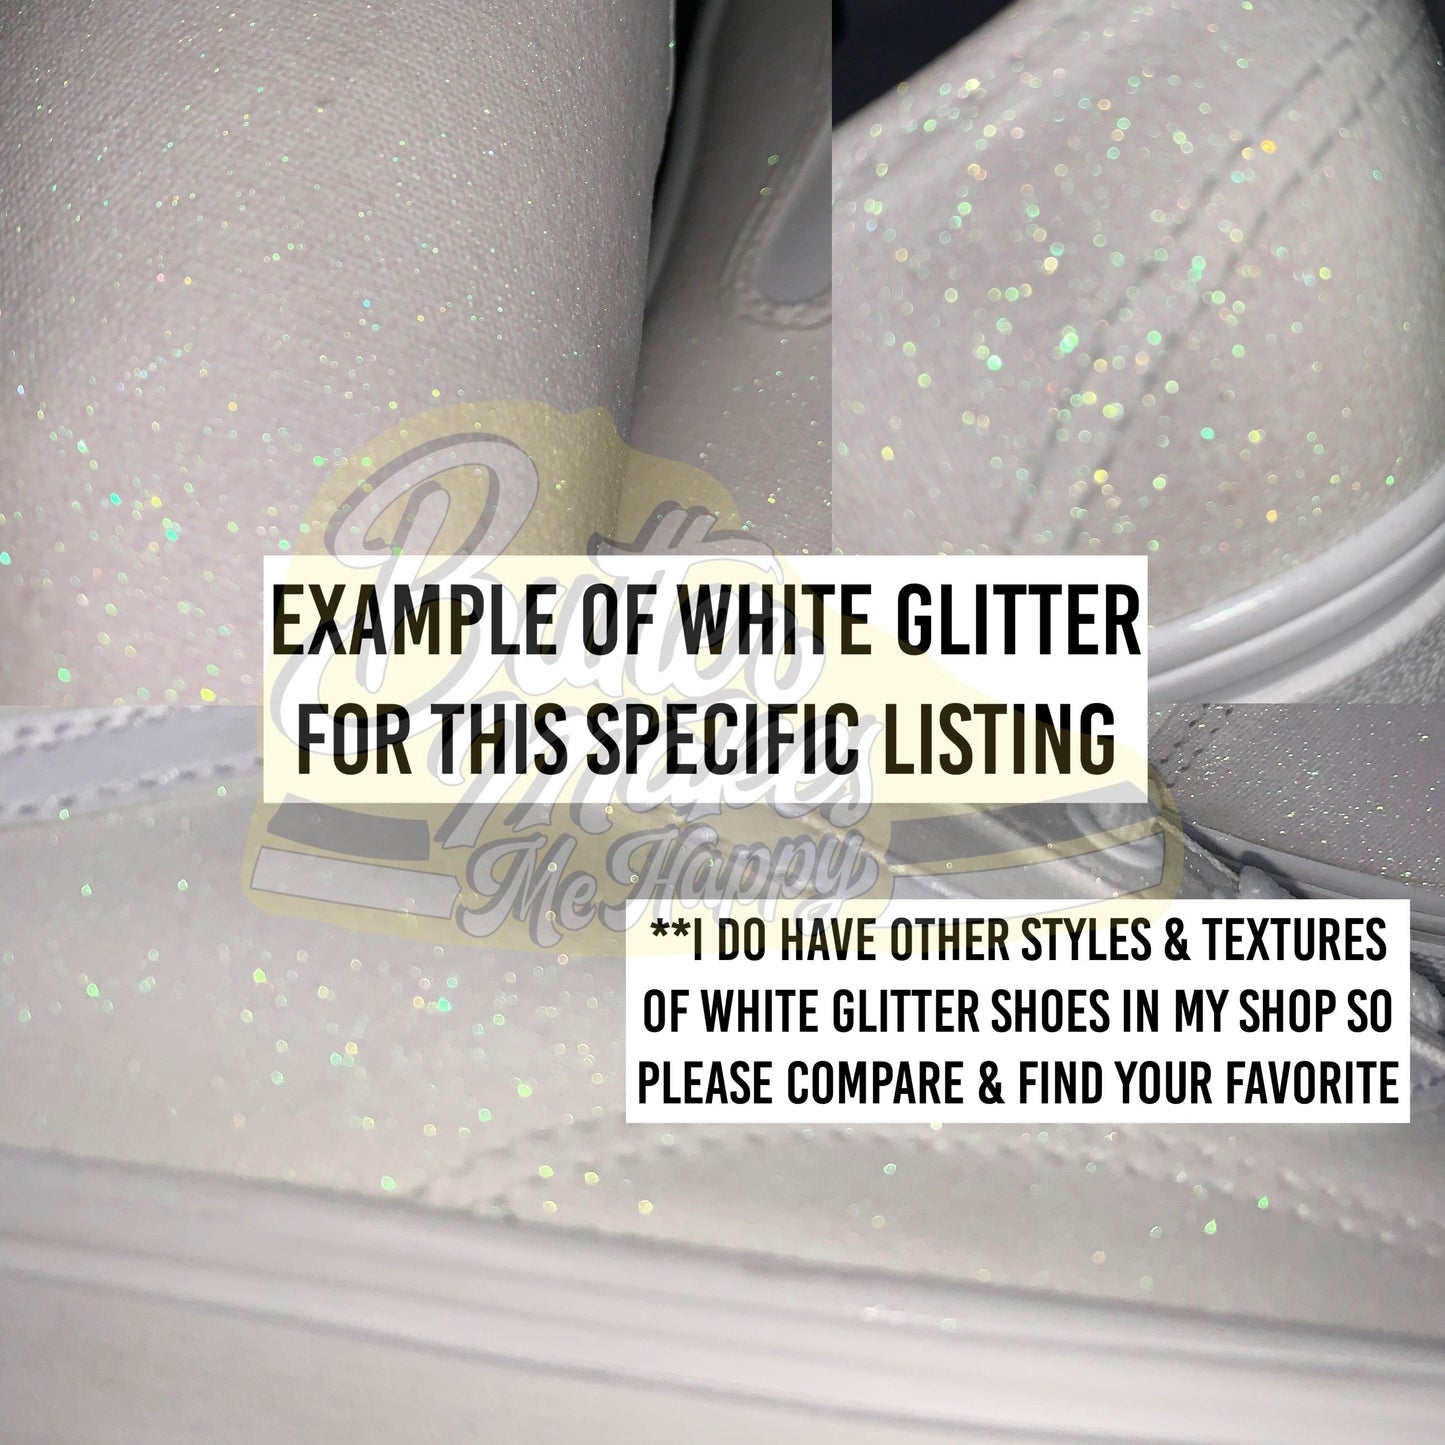 White Glitter Shoes - ButterMakesMeHappy